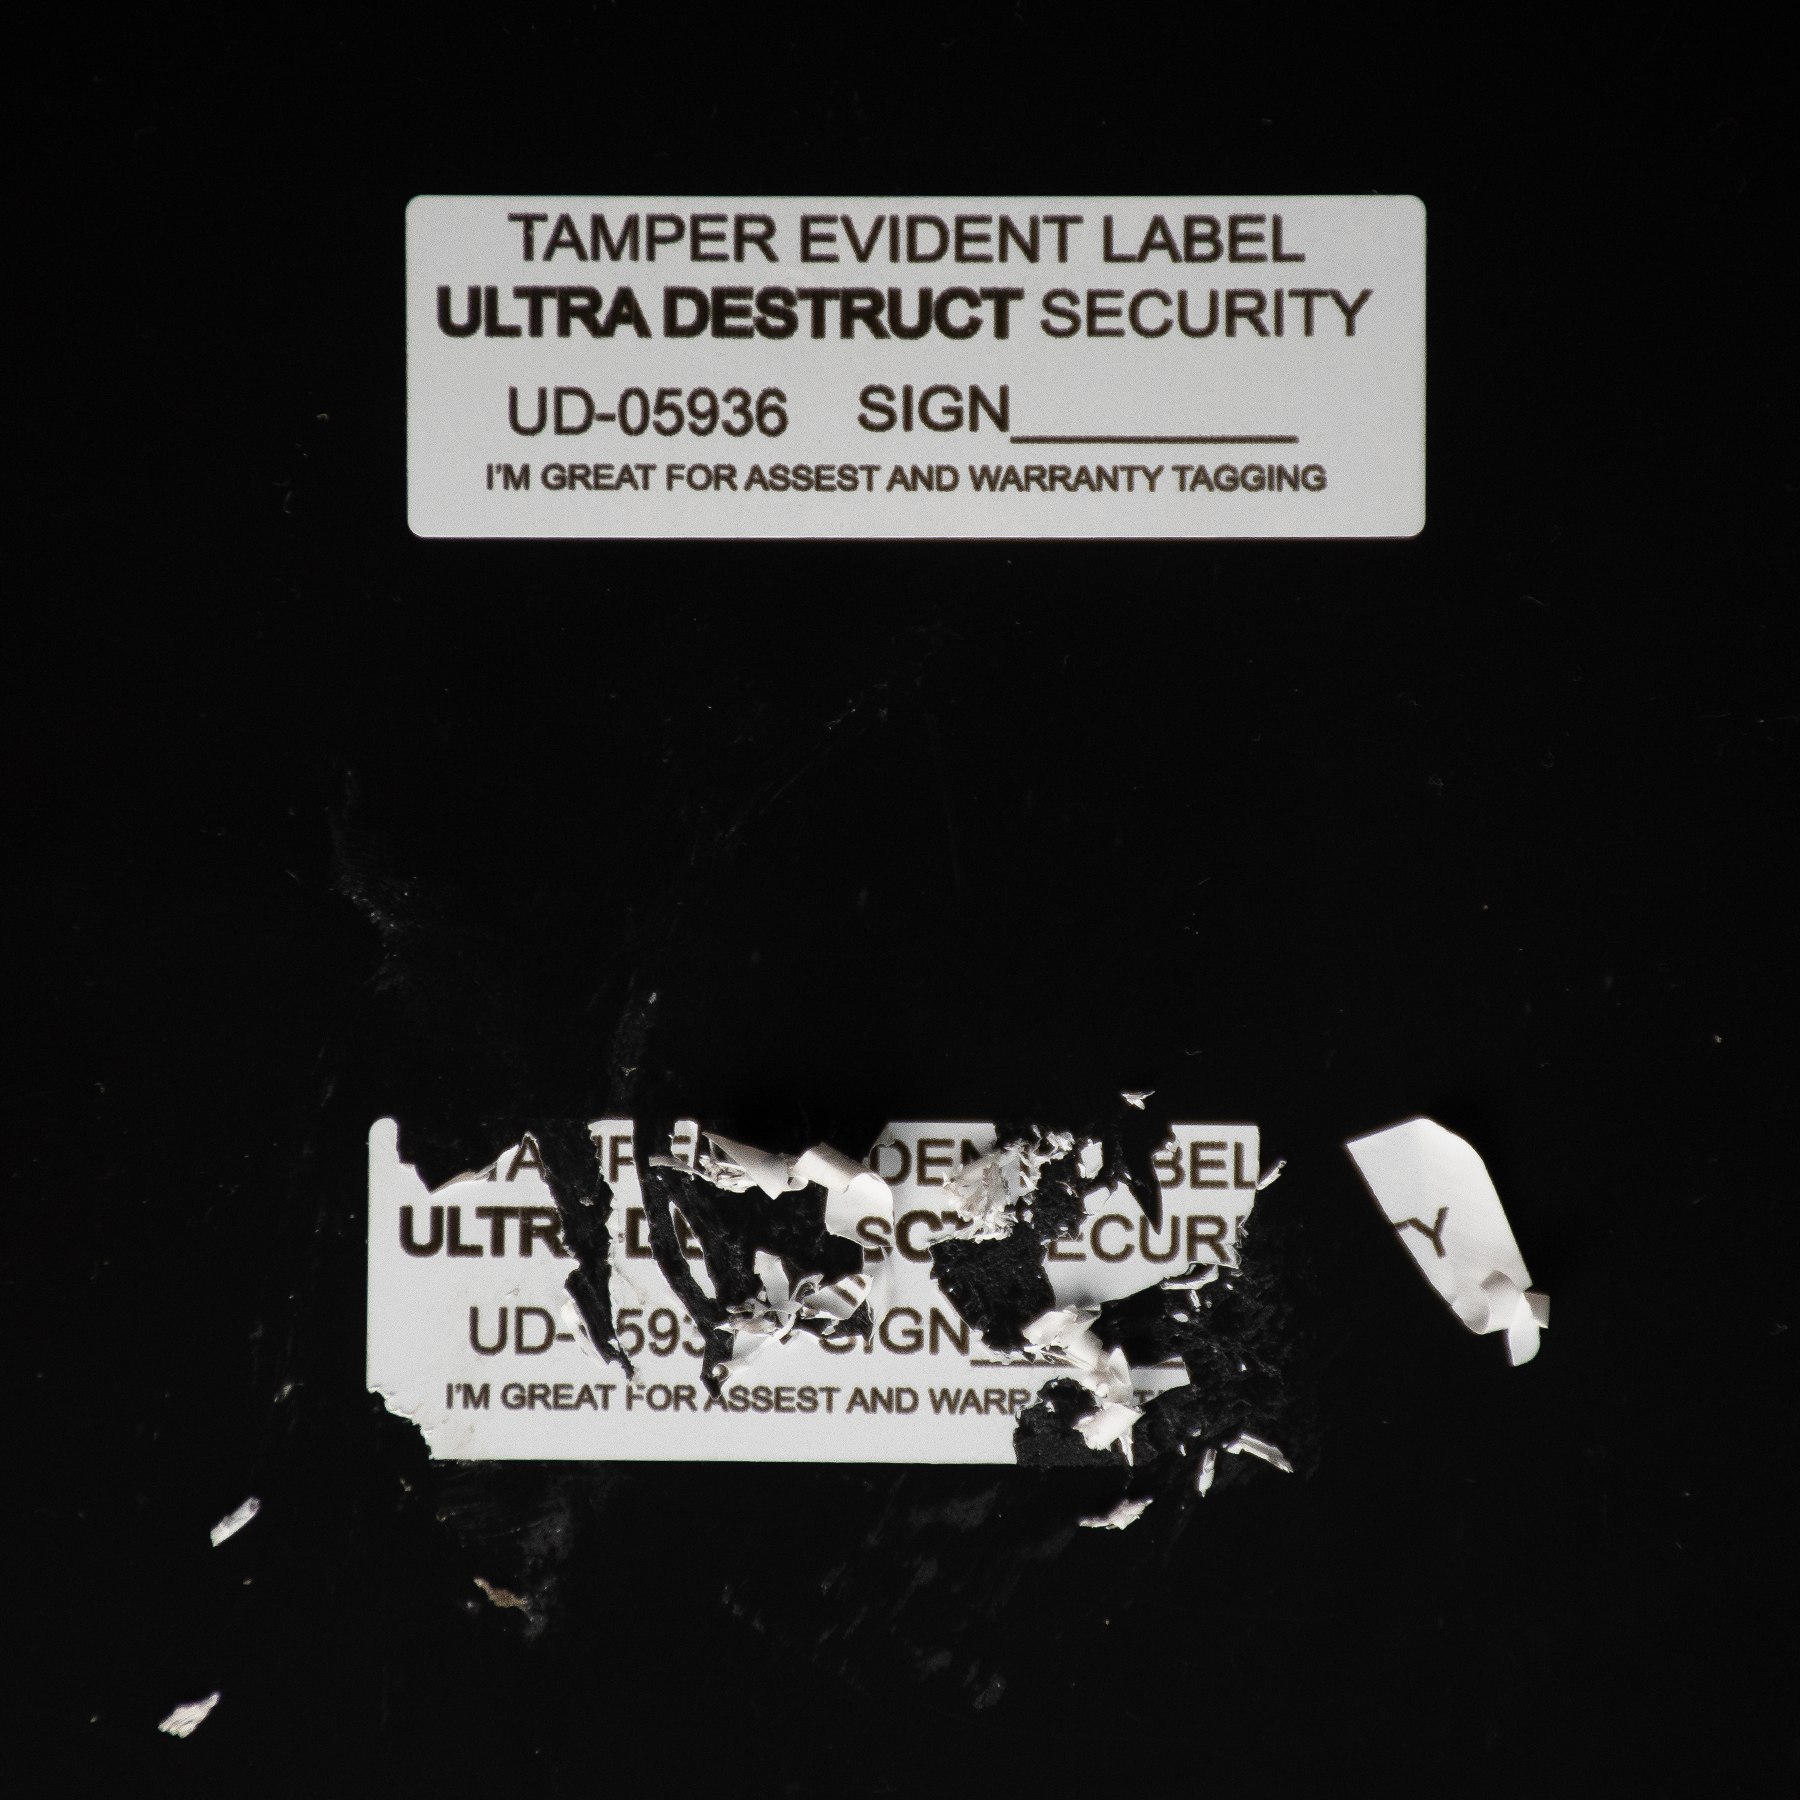 Types of tamper evident security labels explained